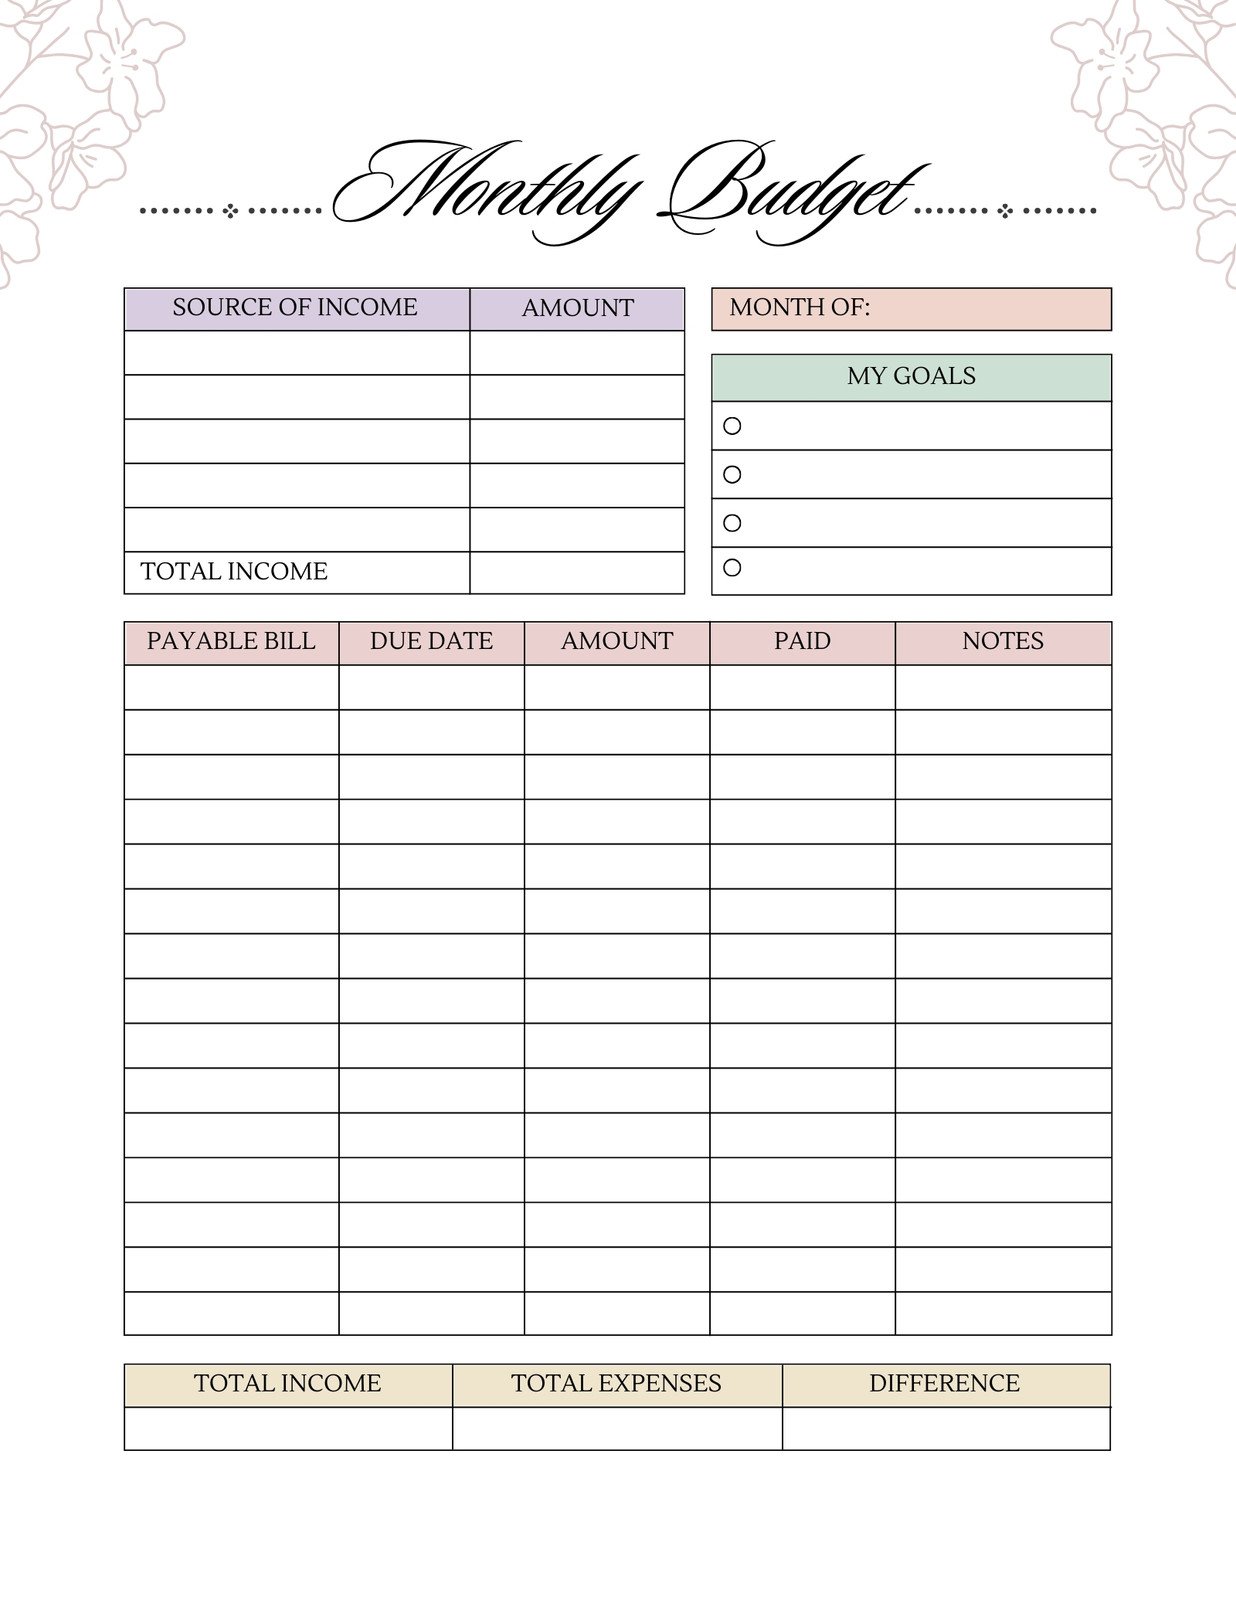 Budget planner templates for personal use